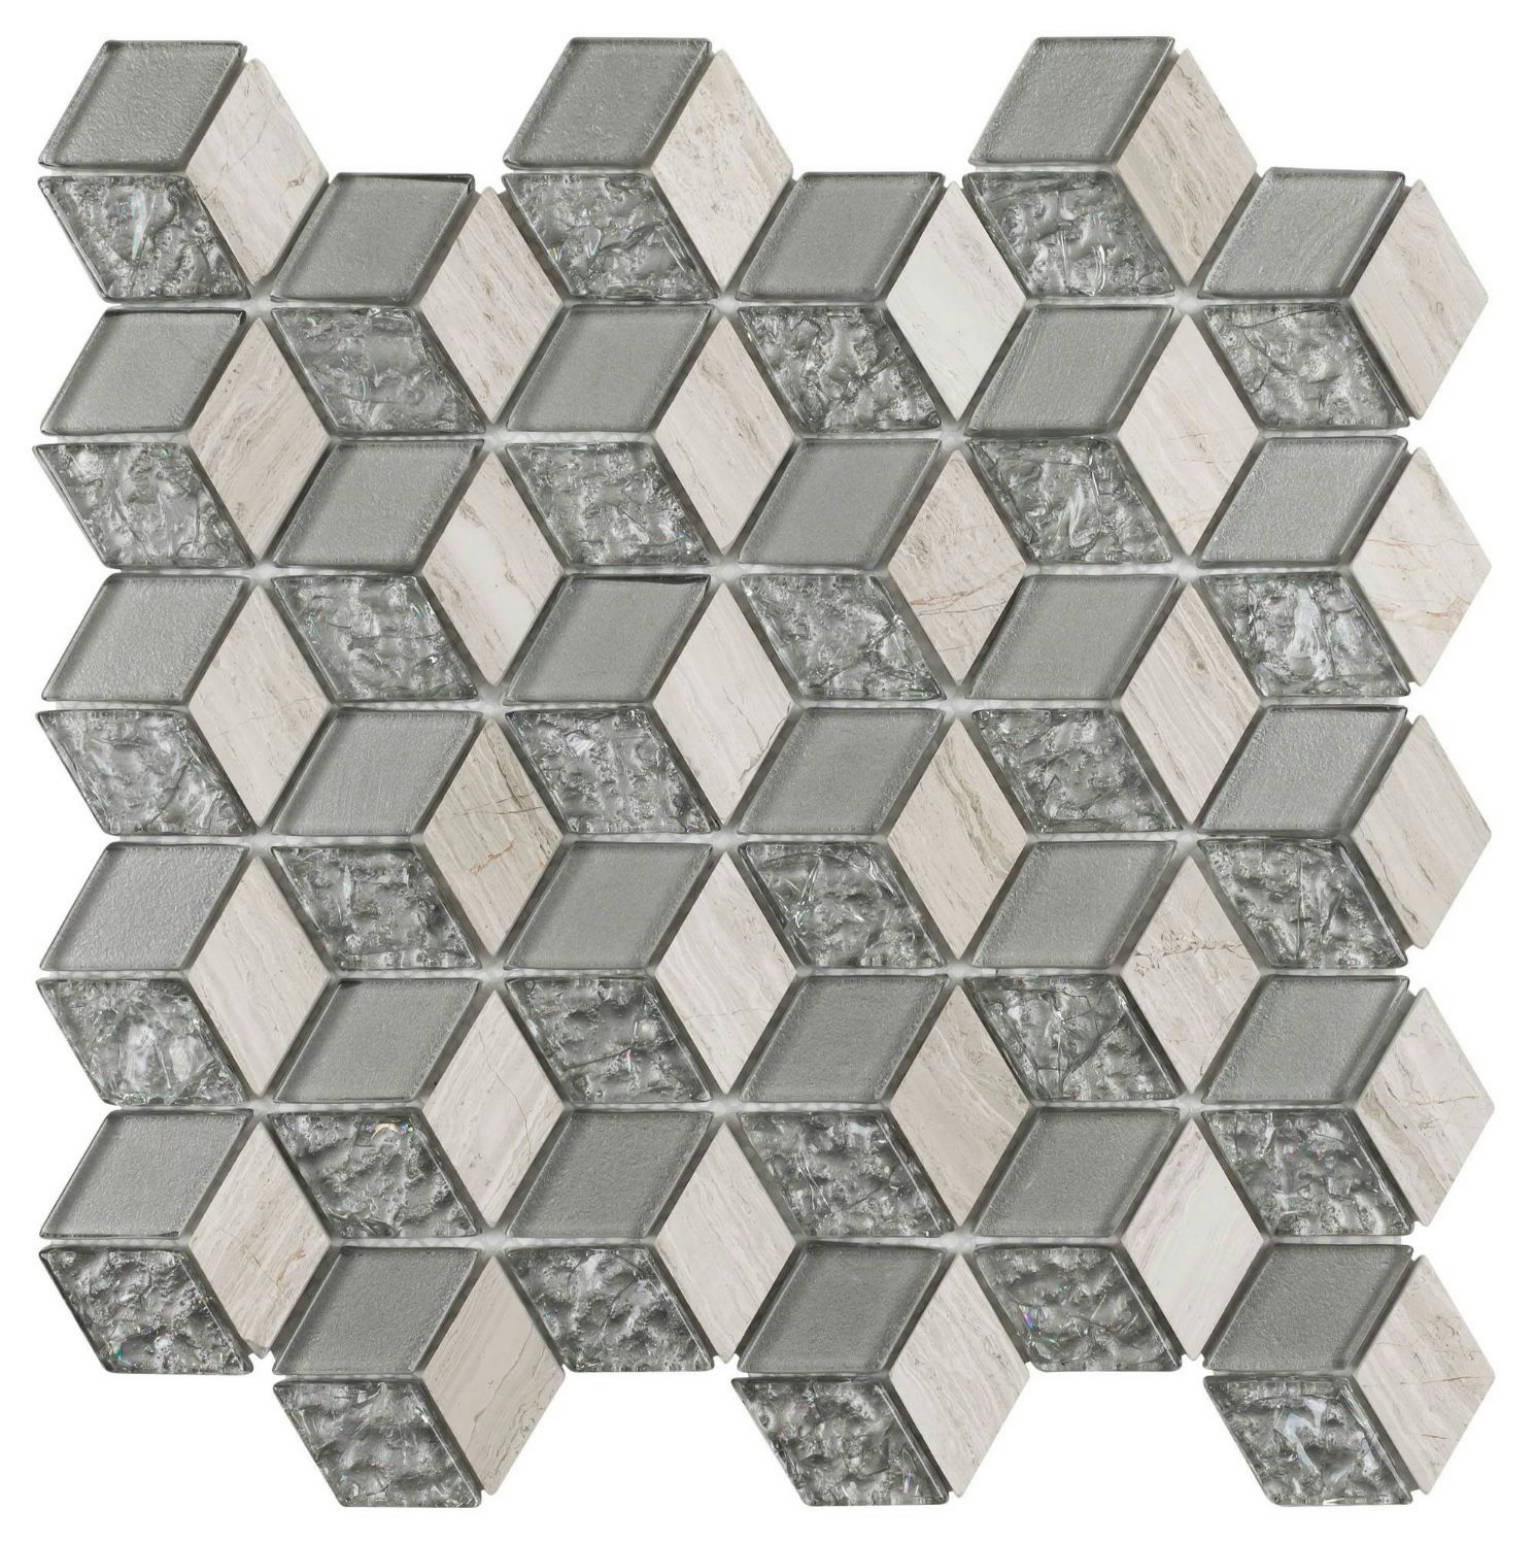 DIA-197 | Stones & More | Finest selection of Mosaics, Glass, Tile and Stone